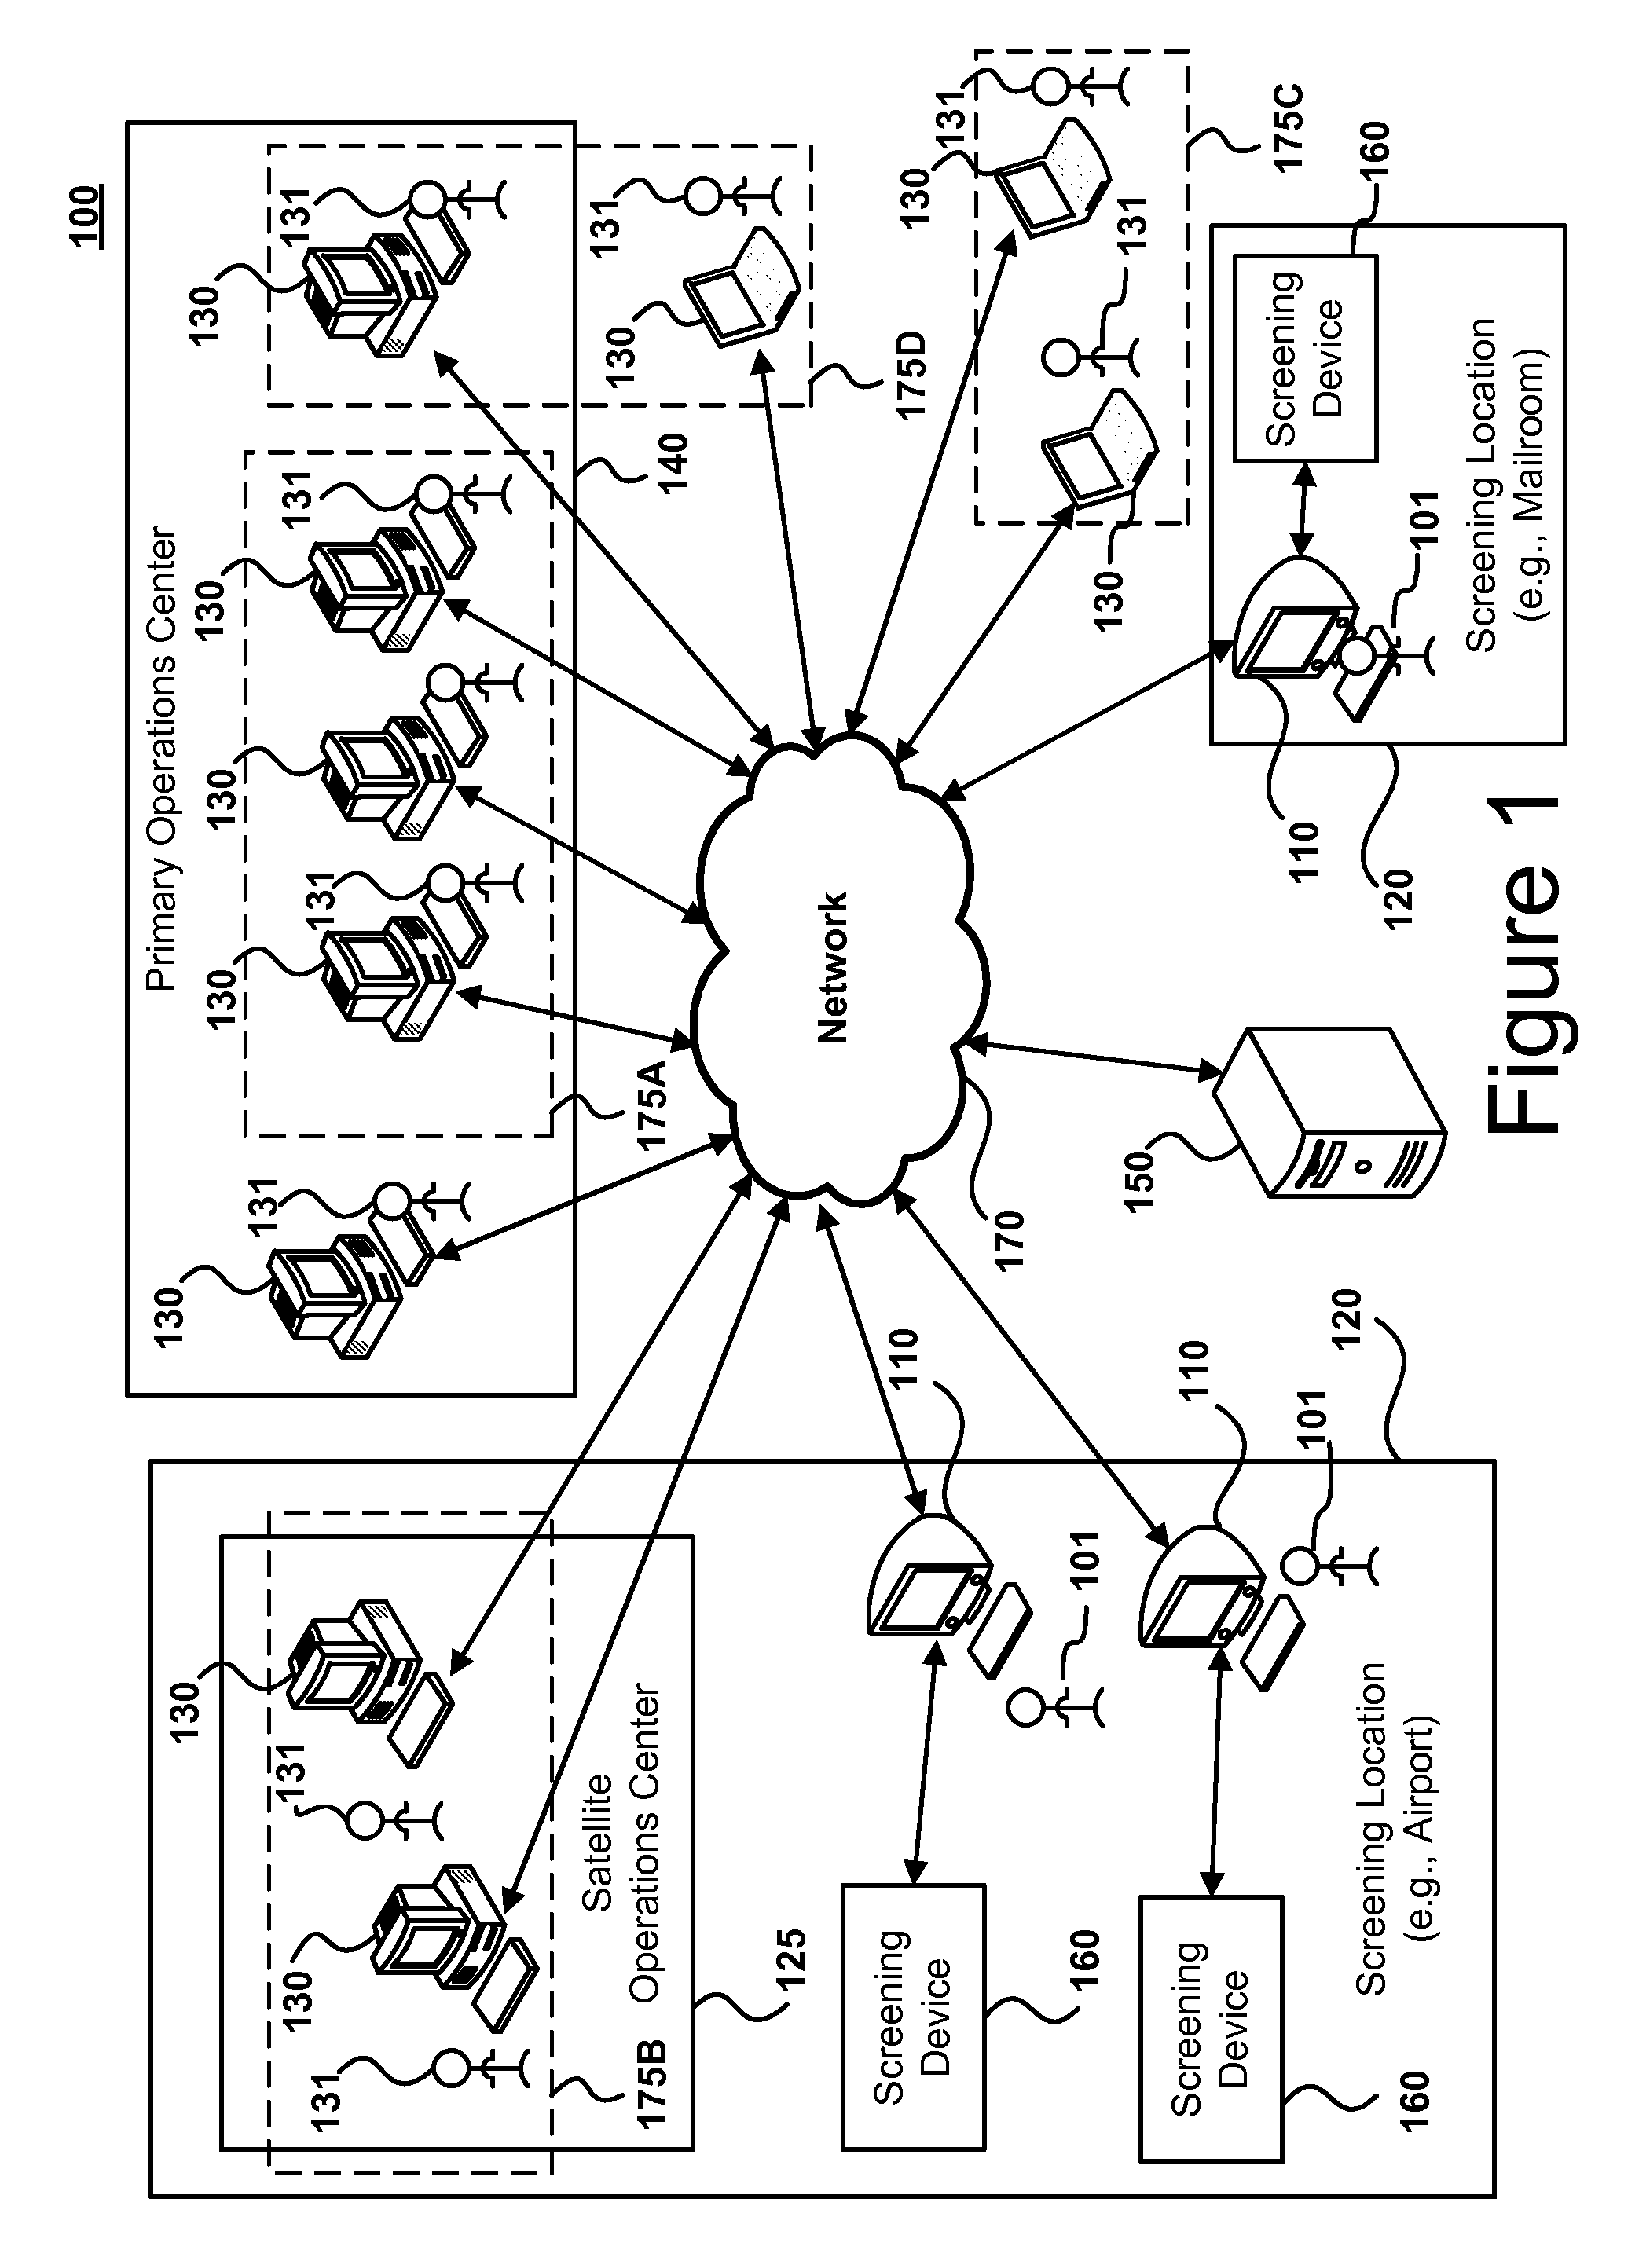 Systems and methods for facilitating remote security threat detection